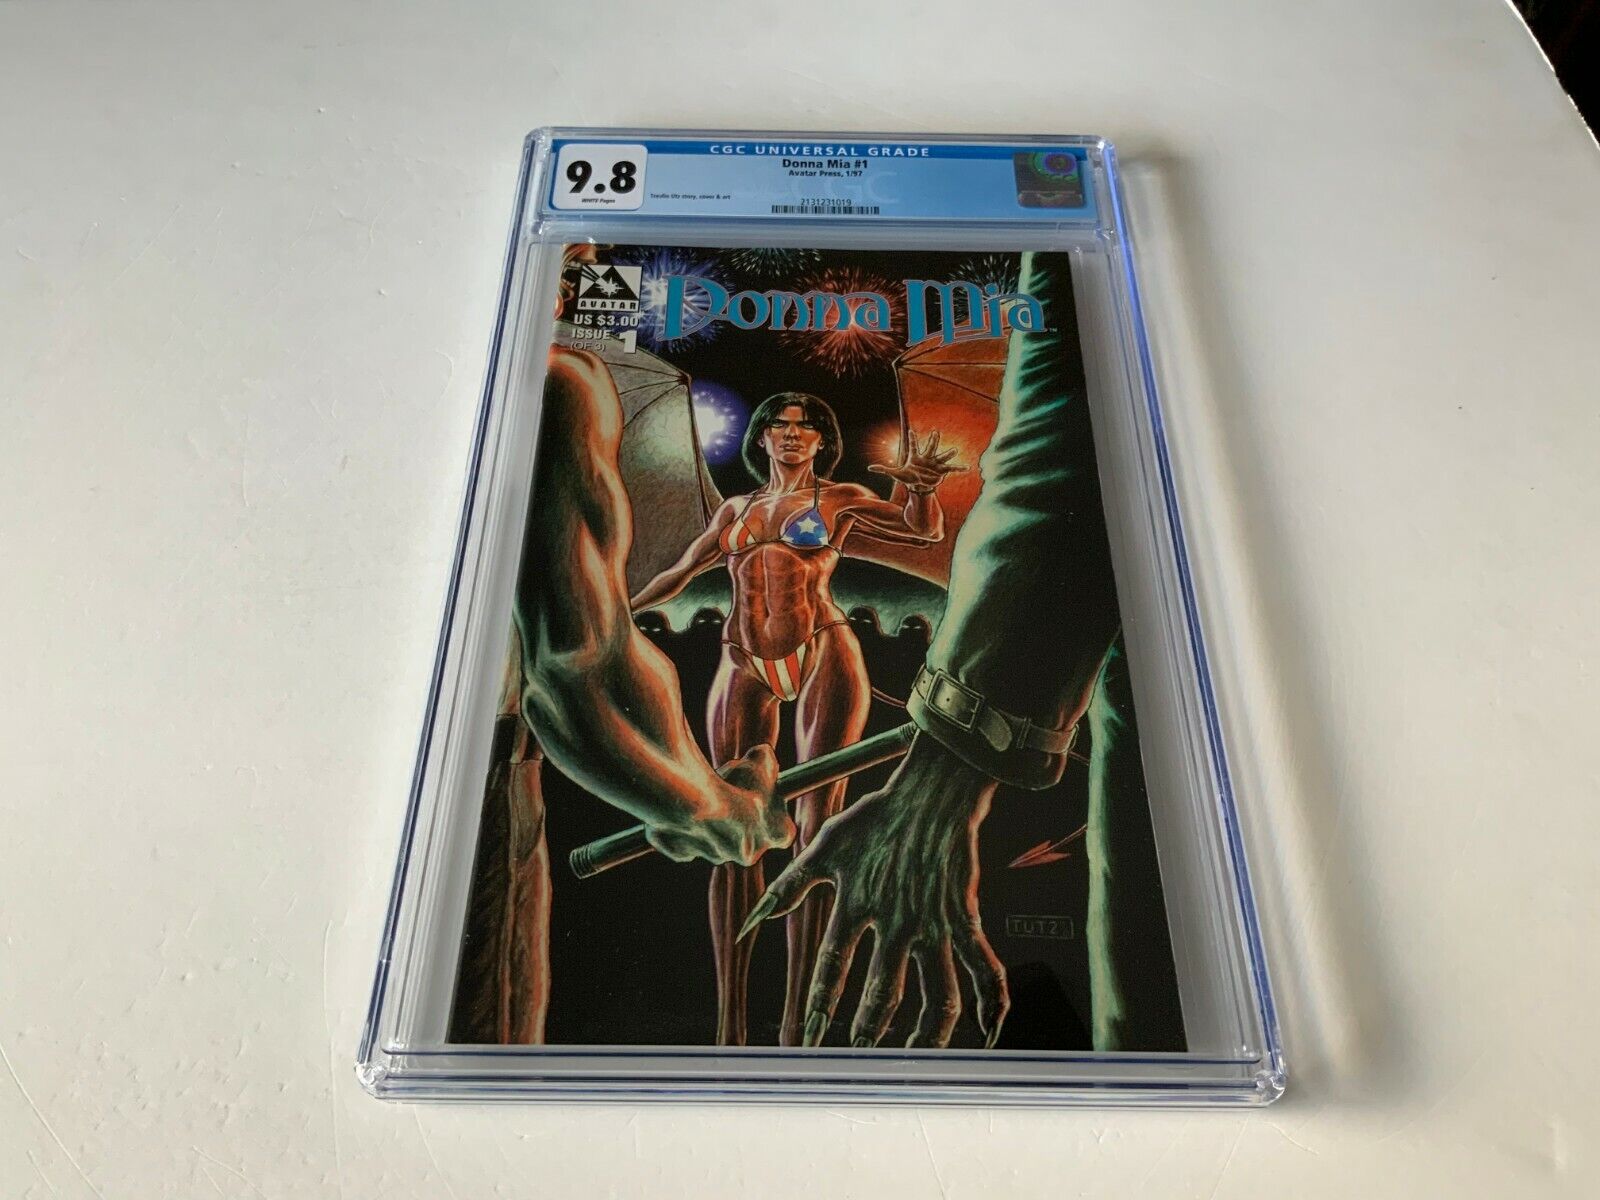 DONNA MIA 1 CGC 9.8 WHITE PAGES SINGLE HIGHEST GRADED AVATAR PRESS 1997 